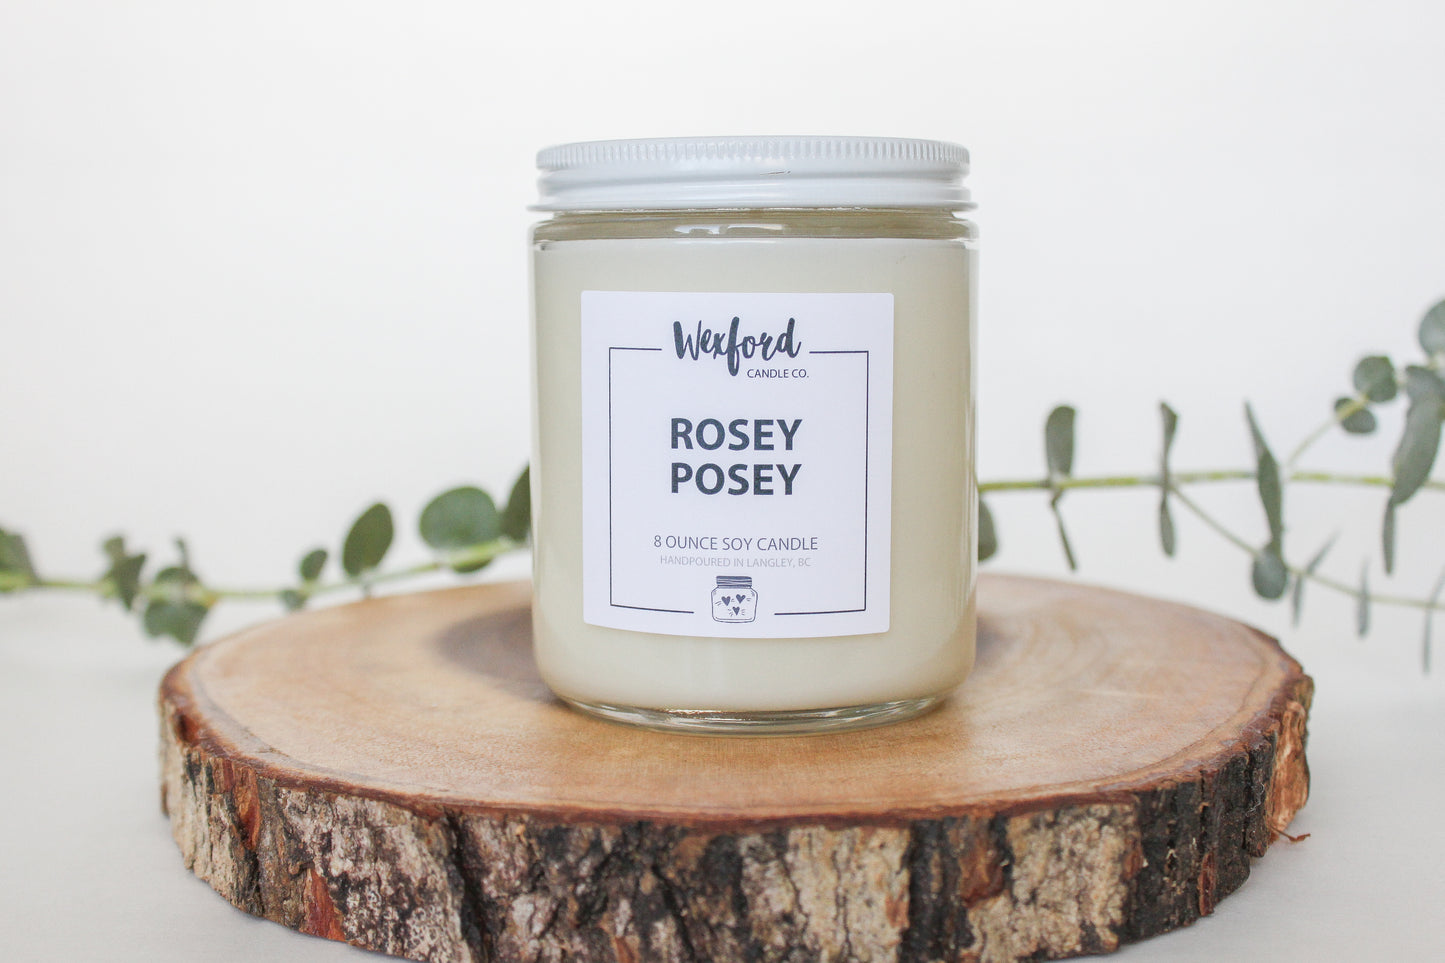 Rosey Posey Soy Candle - Wexford Candle Co.